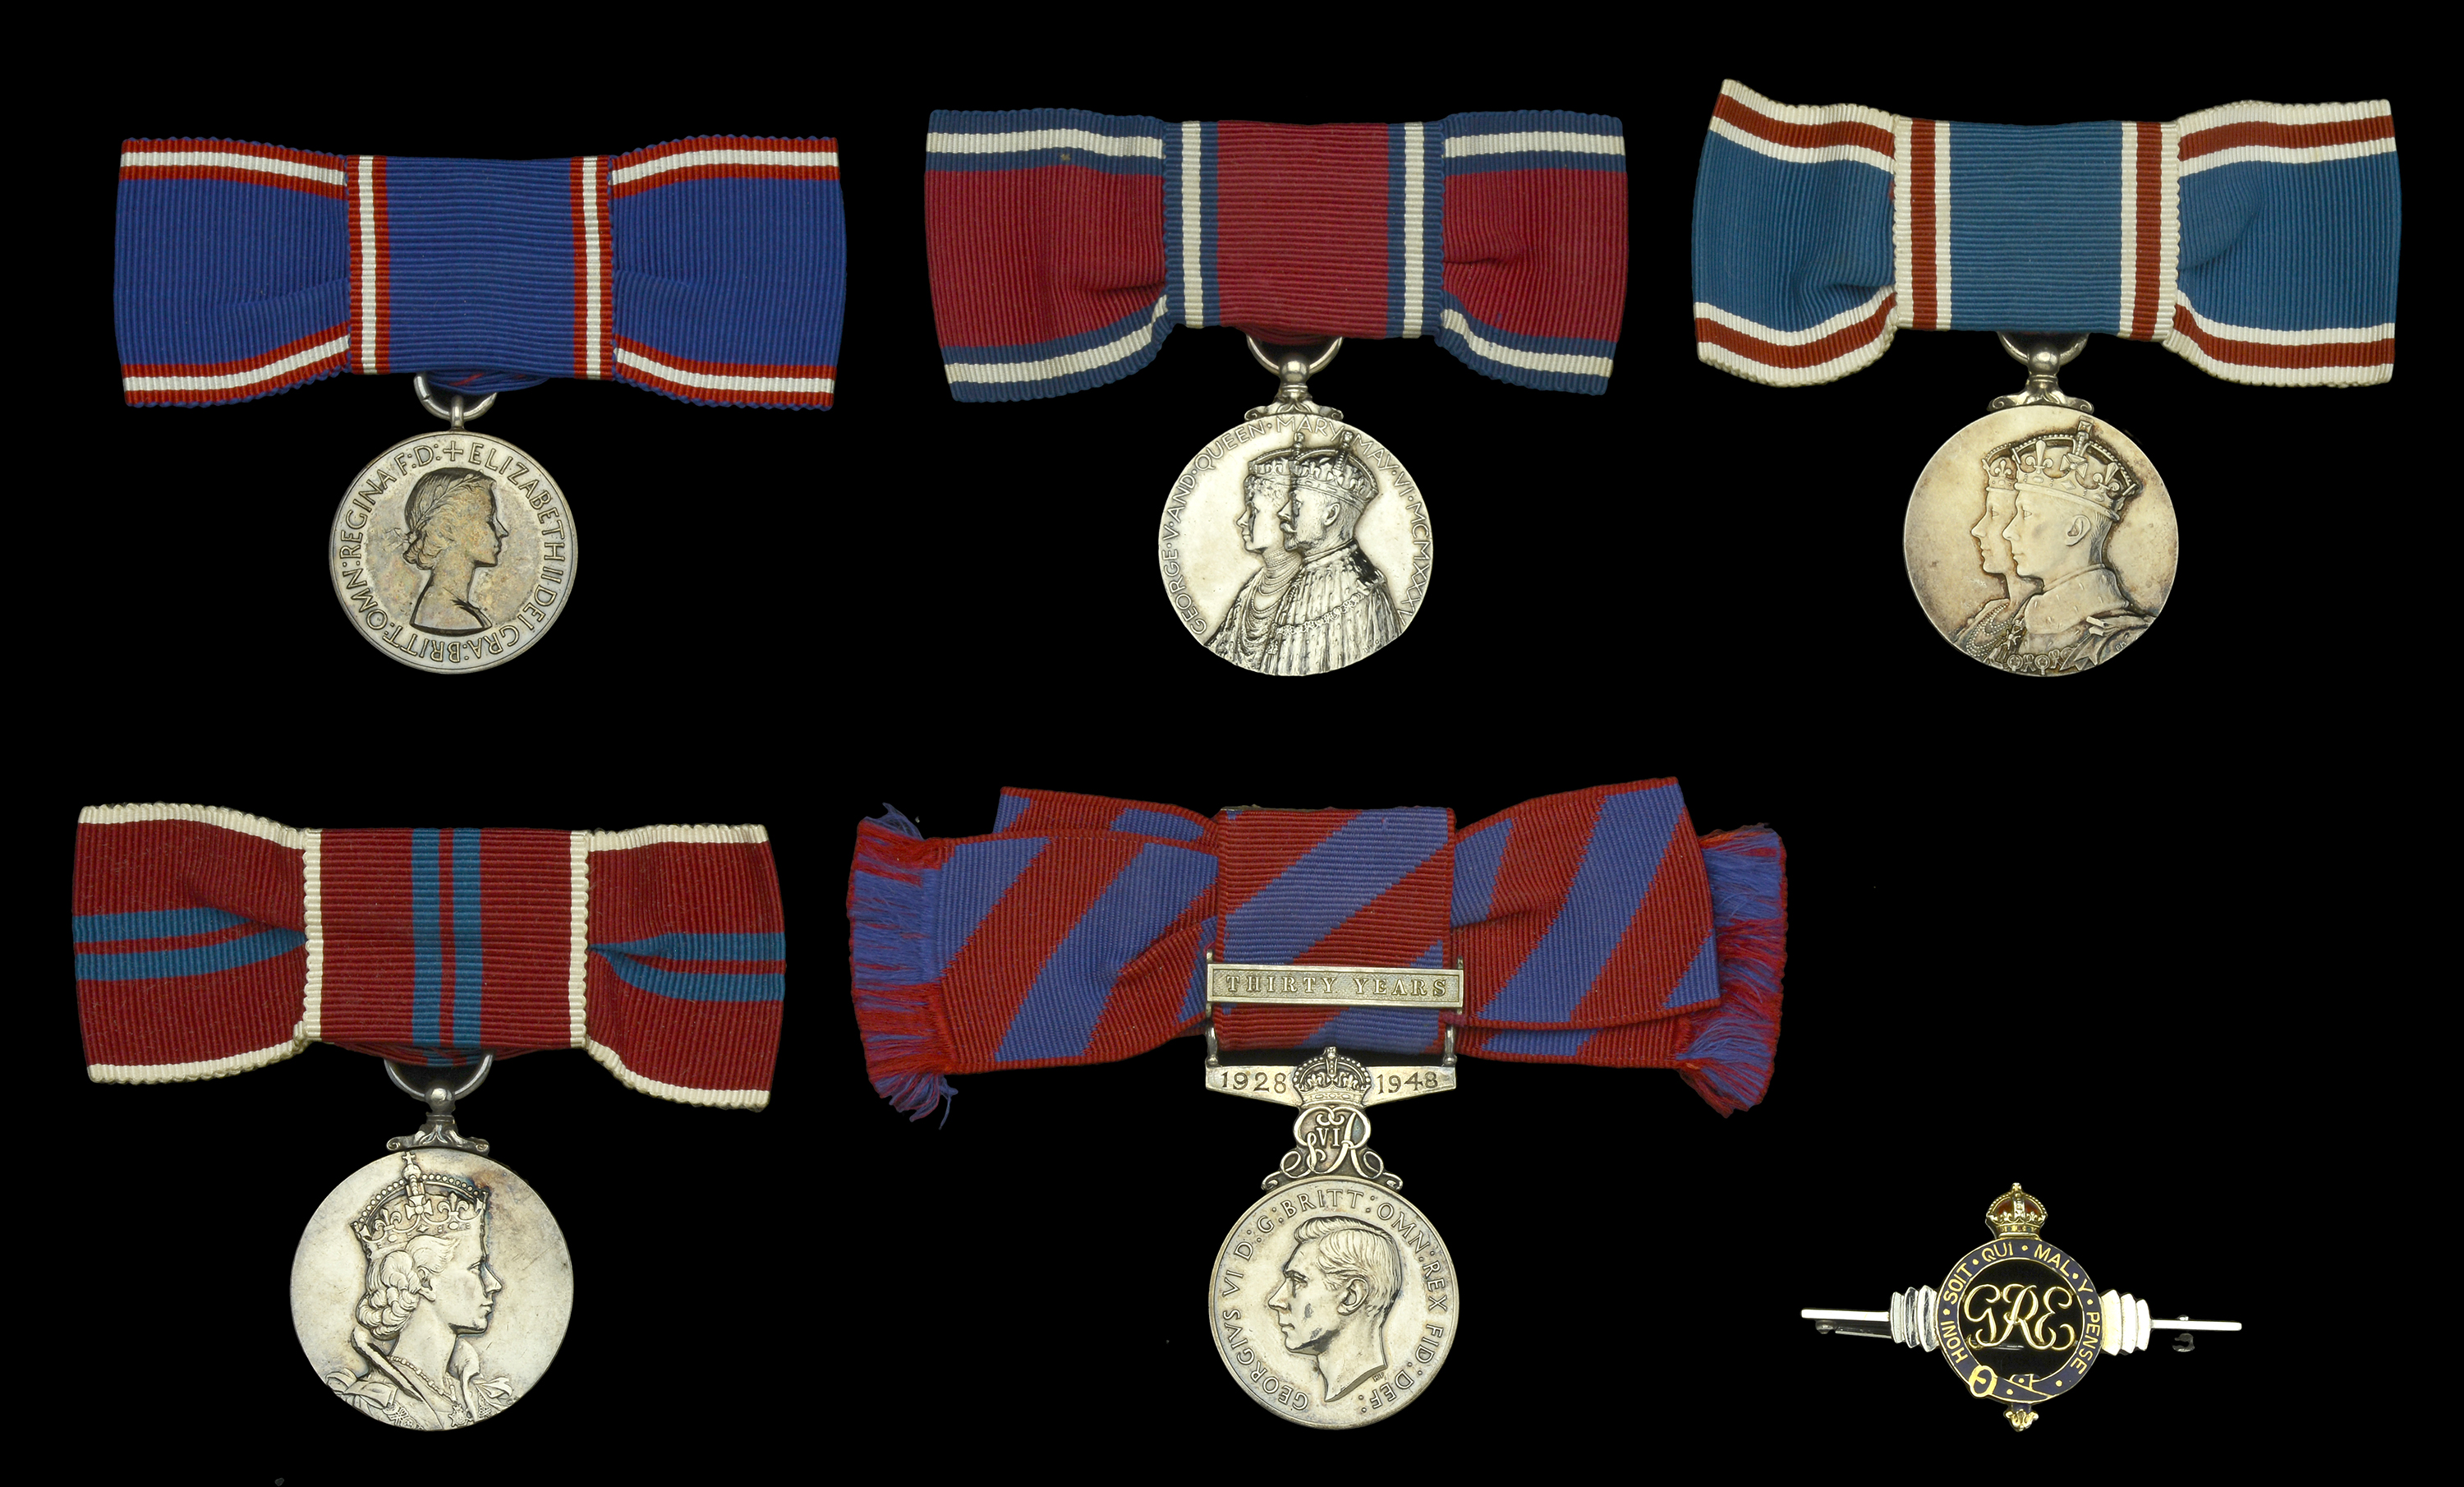 A fine 'Royal Household' R.V.M. group of five awarded to Miss Lucy E. Lintott, Housemaid, Wi...